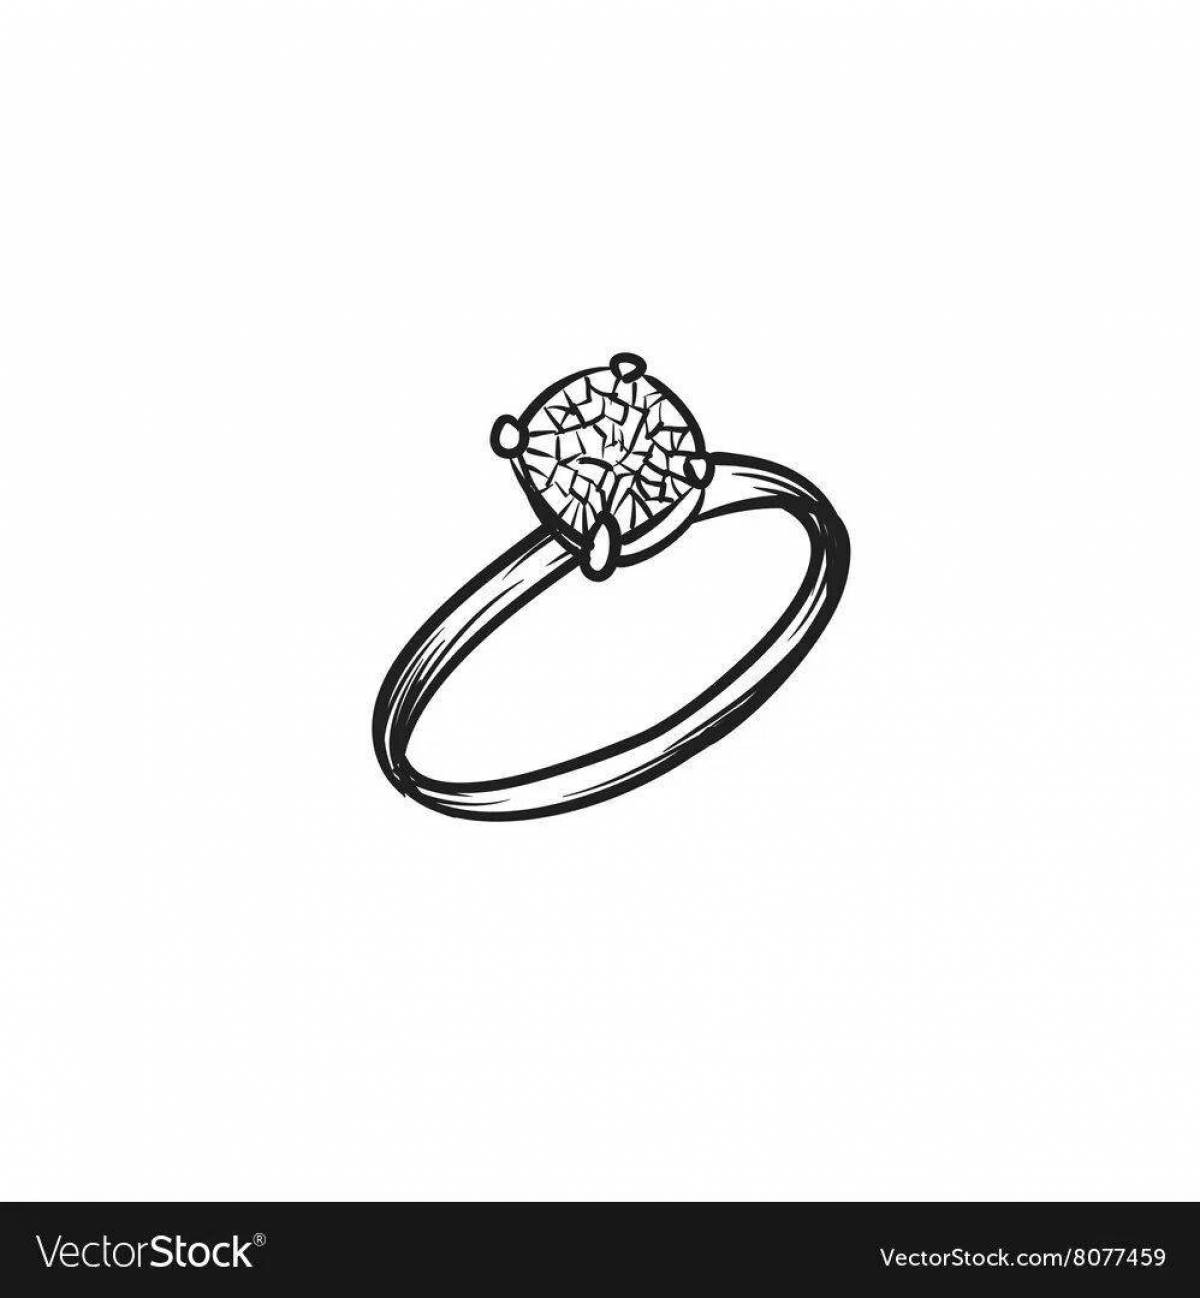 Exquisite ring coloring page for beginners